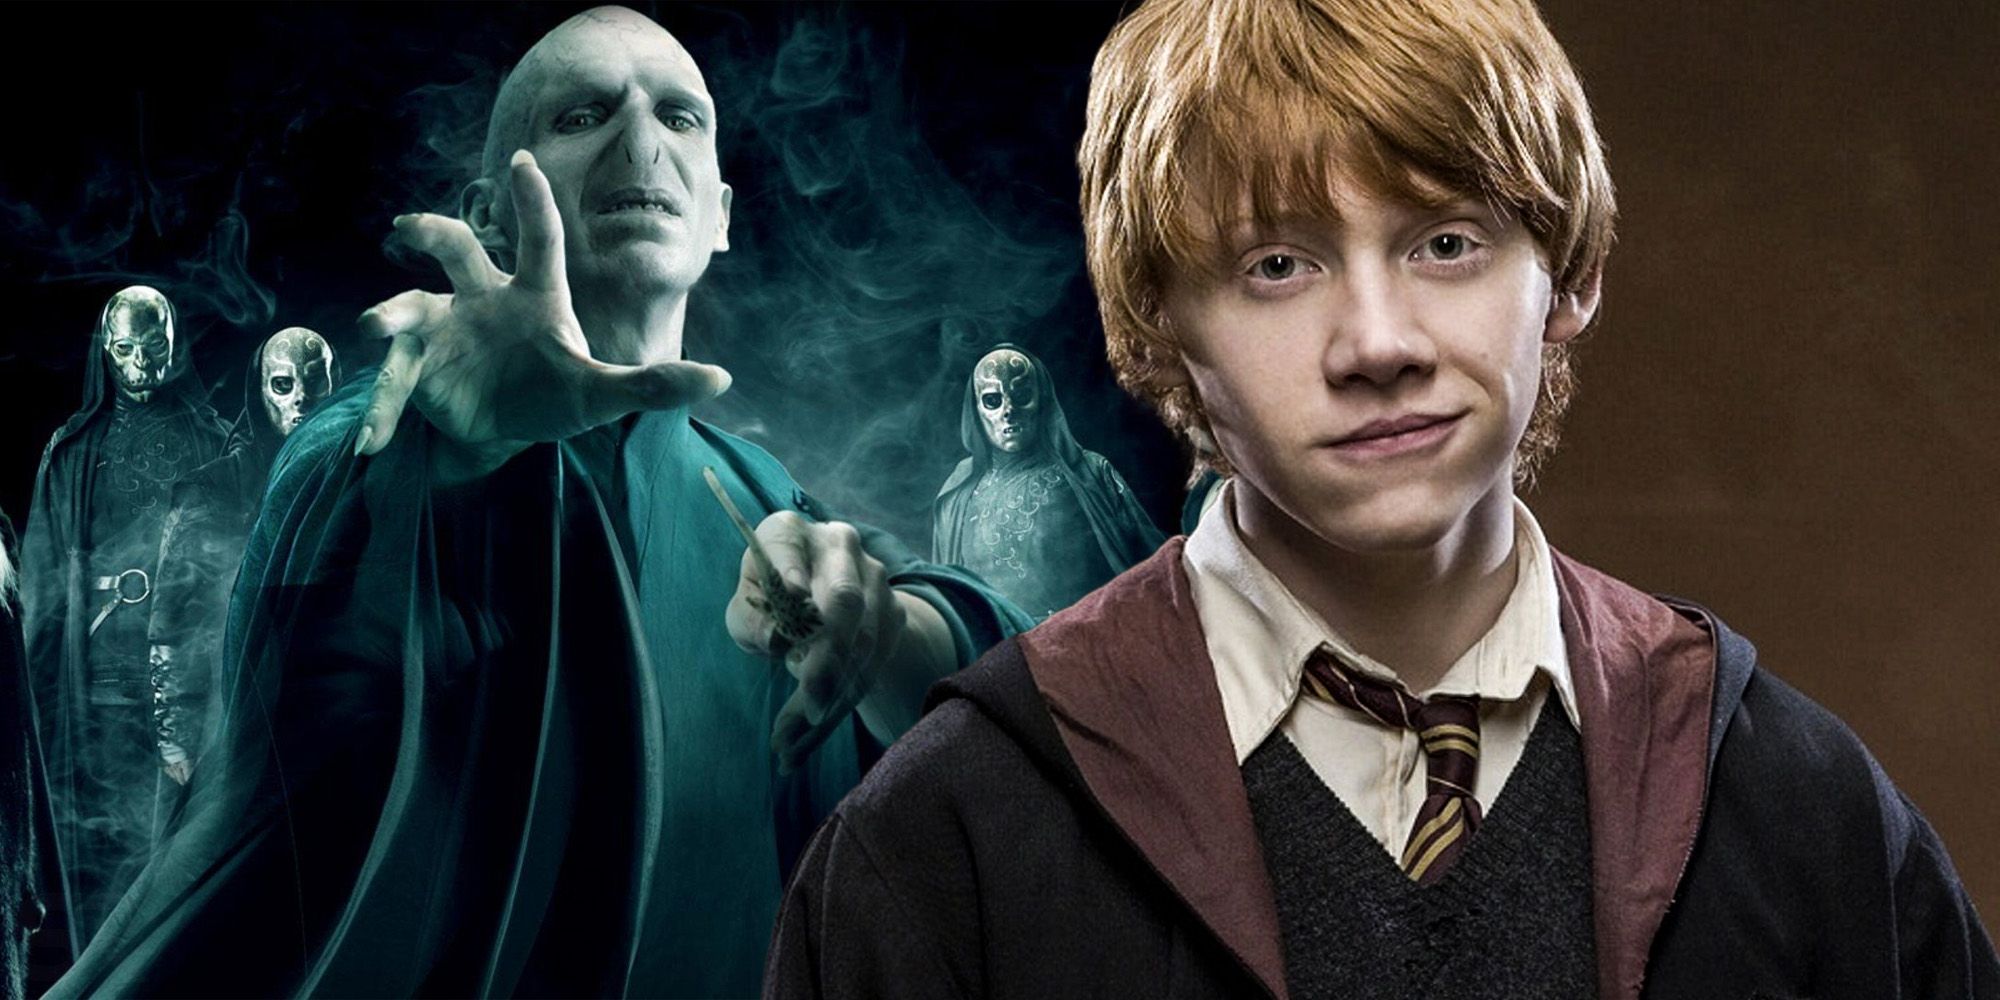 Ronald weasley Death eater theory